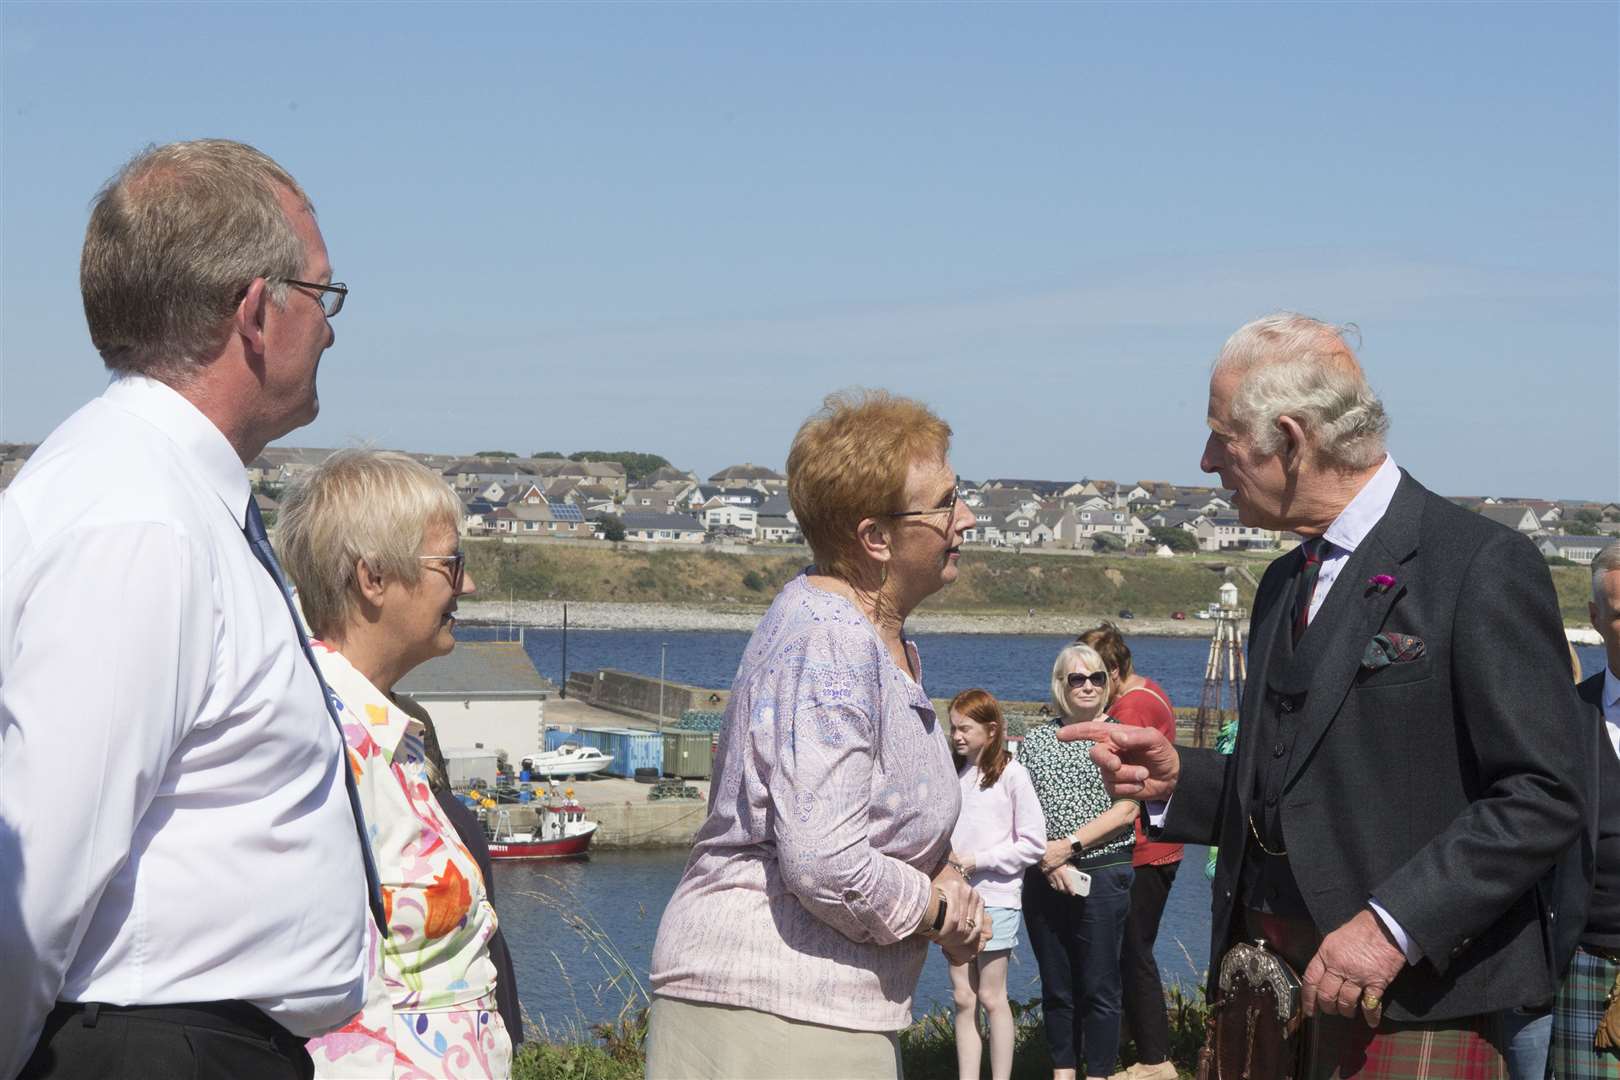 The Duke of Rothesay speaking to Jan Farrington on his arrival at the Healing Hub oxygen therapy centre. Looking on are Yvonne Hendry and Allan Tait of Caithness Voluntary Group. Picture: Robert MacDonald / Northern Studios